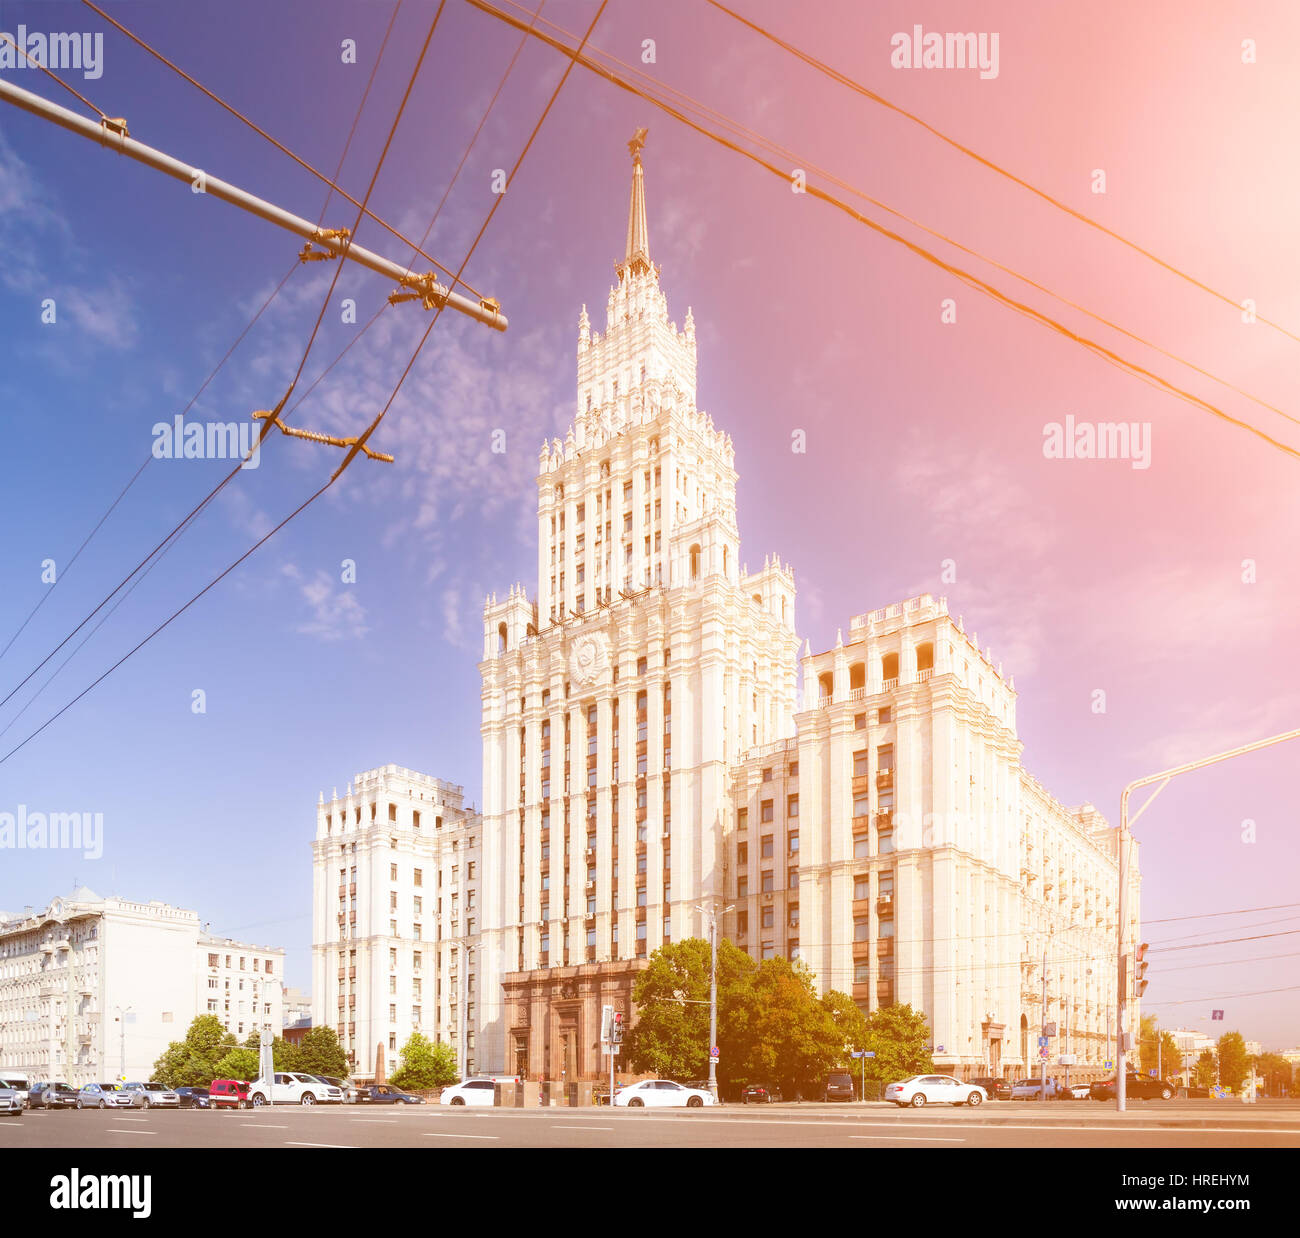 Red Gate Building in Moscow under the warm sunlight Stock Photo